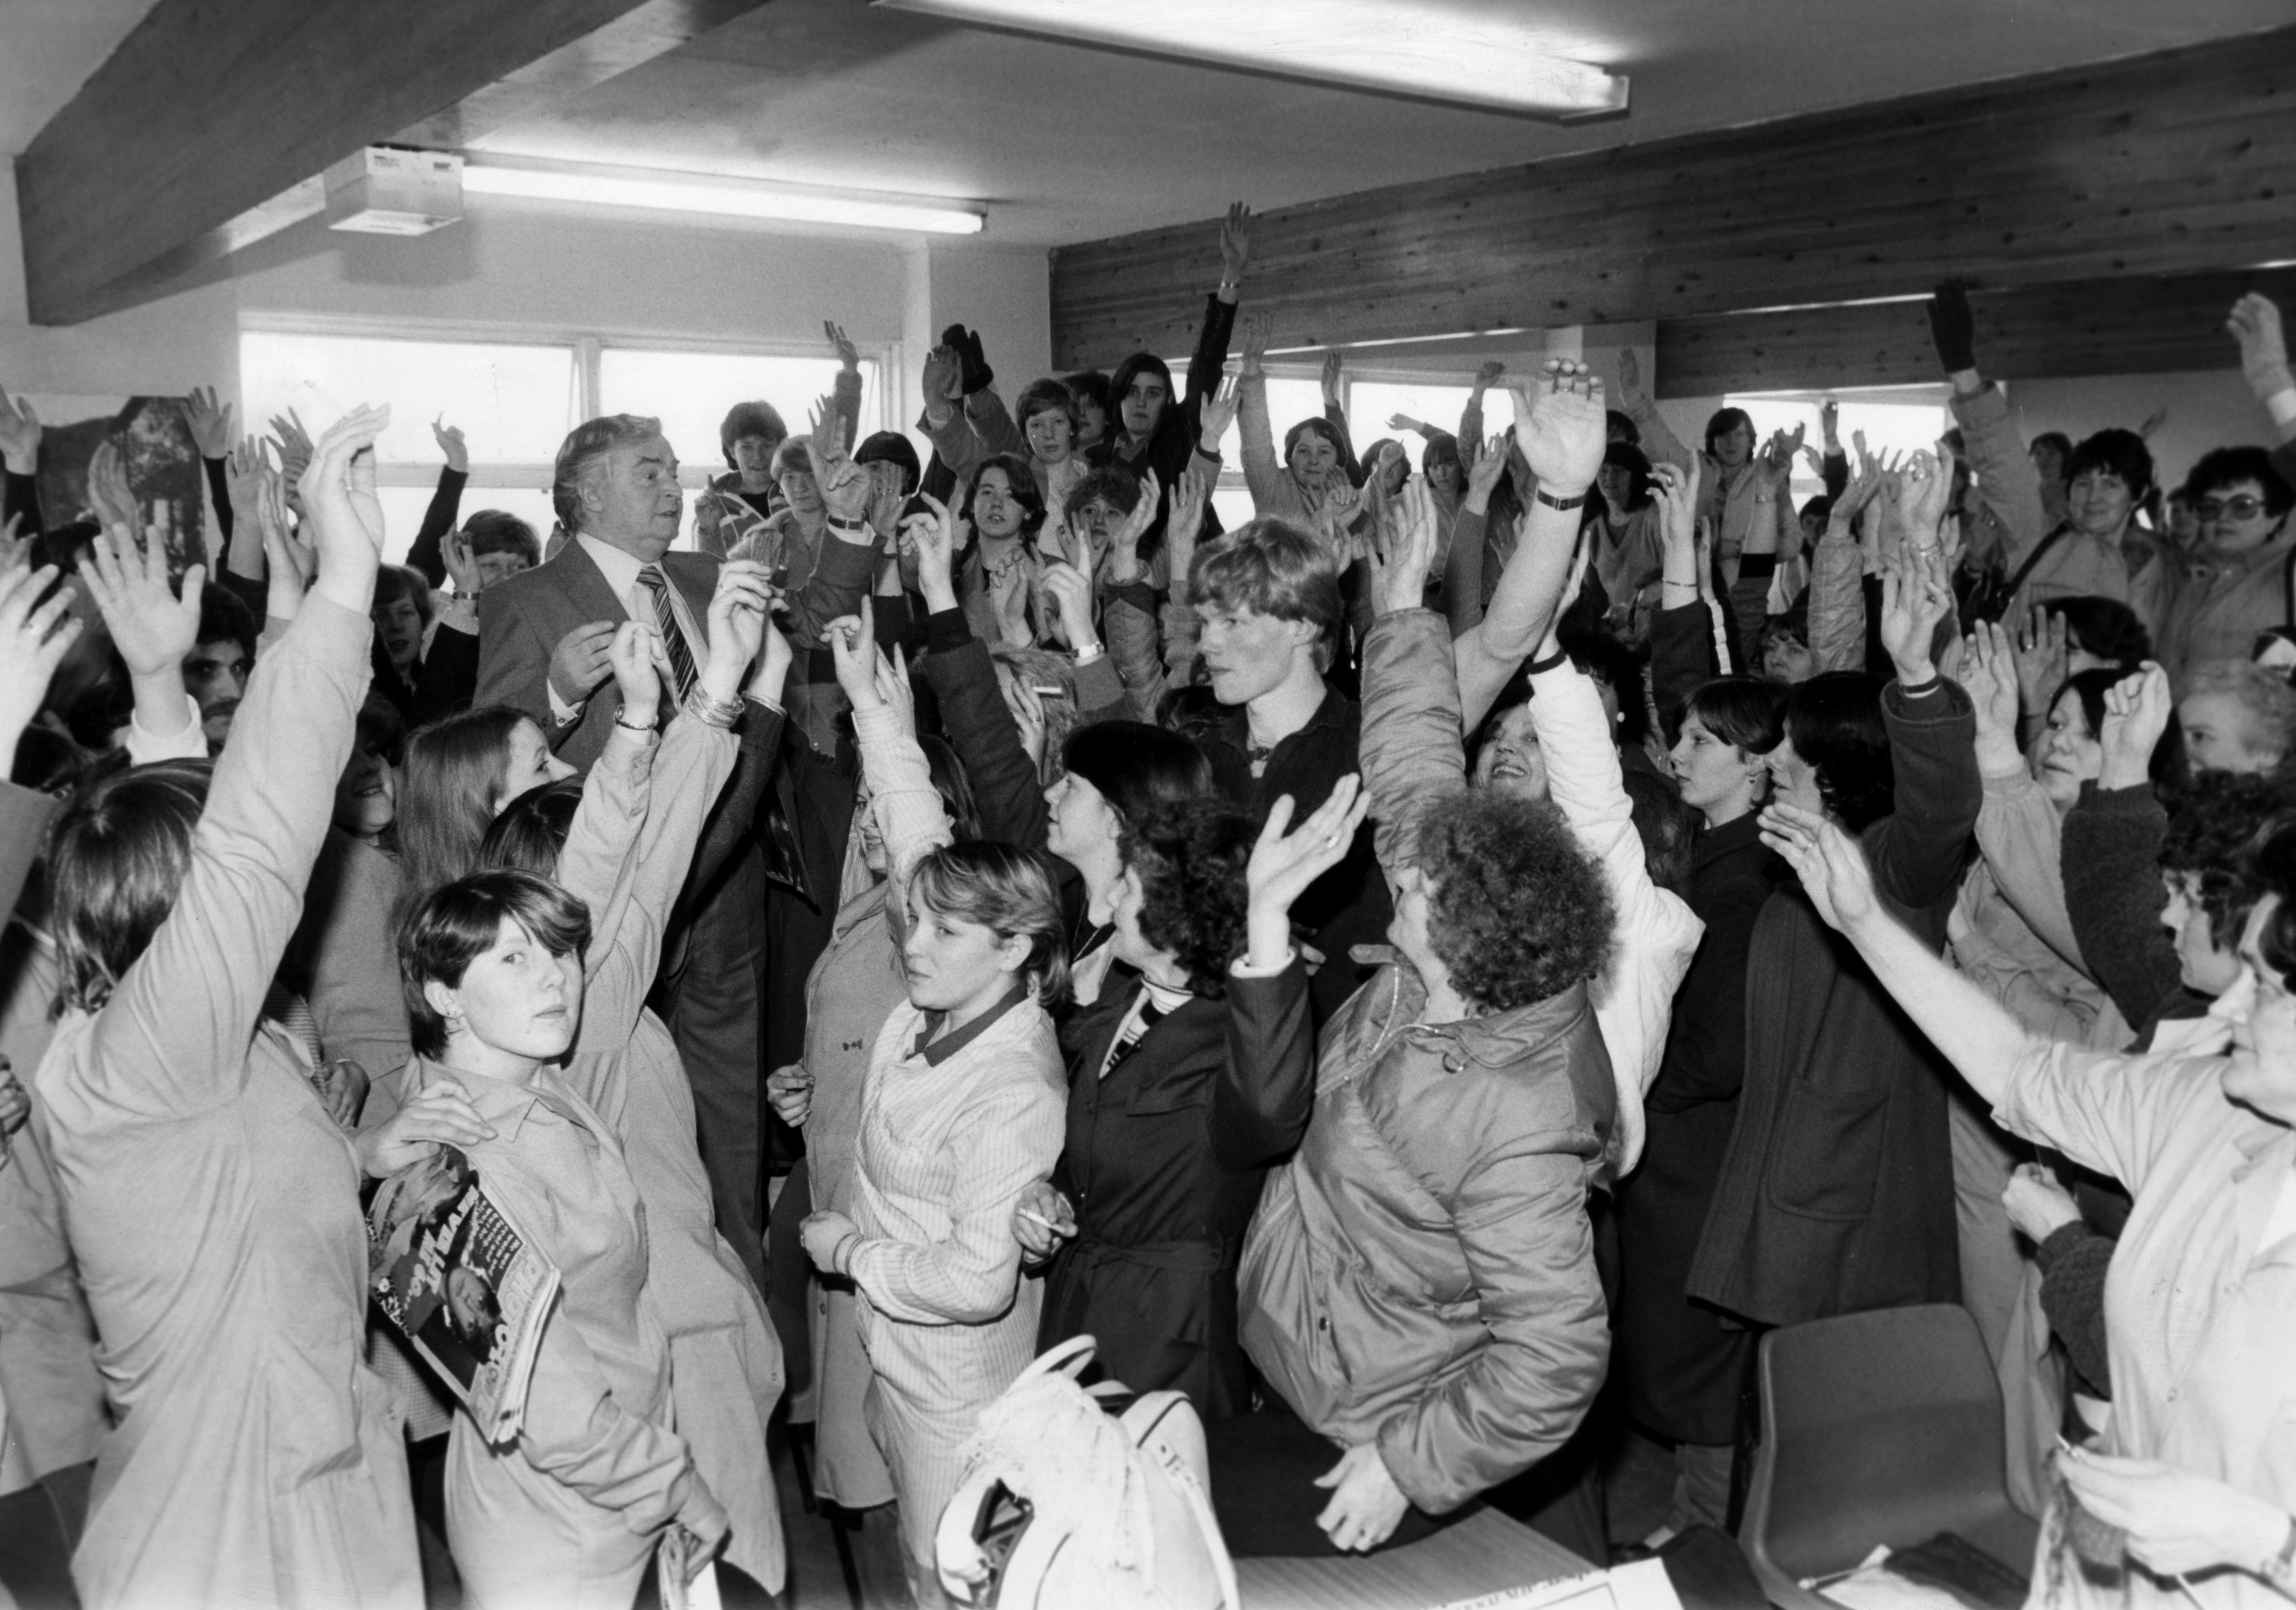 More than 200 women unanimously voted to continue their sit-in at Lee Leisurewear, Larkfield Estate, Greenock, February 9 1981. The women, and their male colleagues, started the sit-in last week after their American bosses said the factory was to close. David Wales, a member of the union's national executive, visited the sit-in and was given overwhelming backing to continue the fight. (Photo by Mirrorpix/Getty Images)